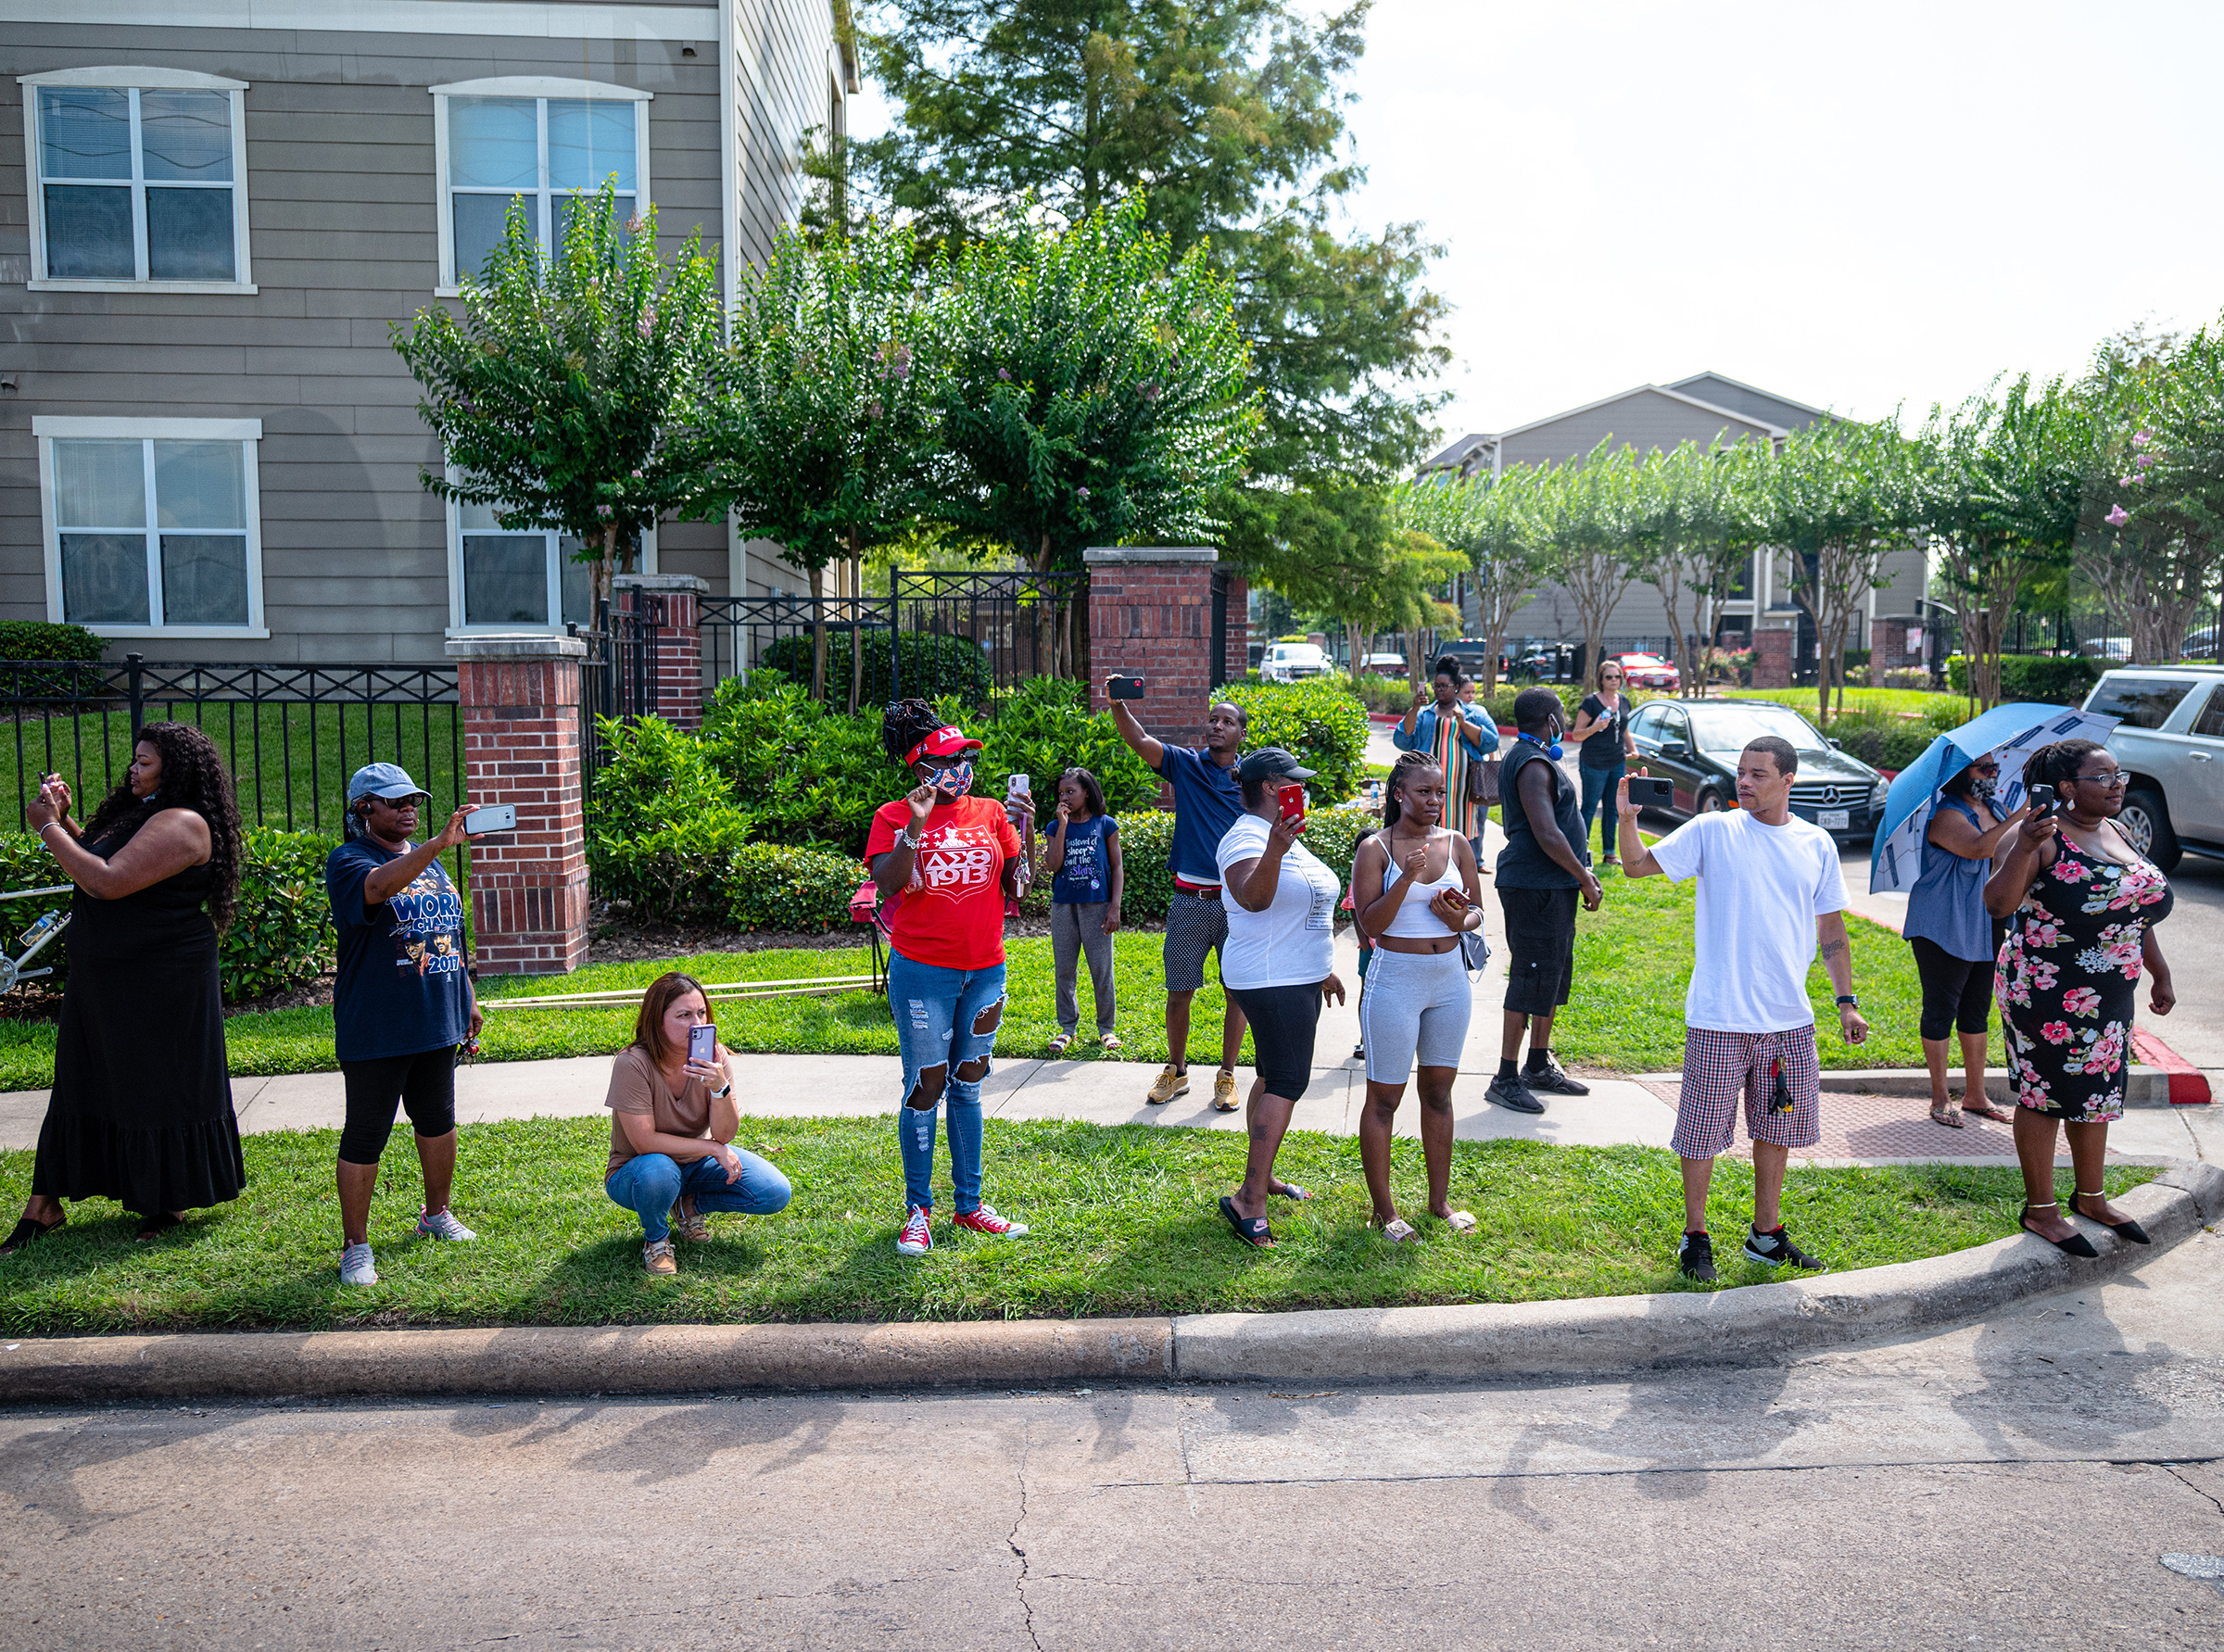 Onlookers document the passing of George Floyd’s funeral procession on June 9. (Ruddy Roye for TIME)